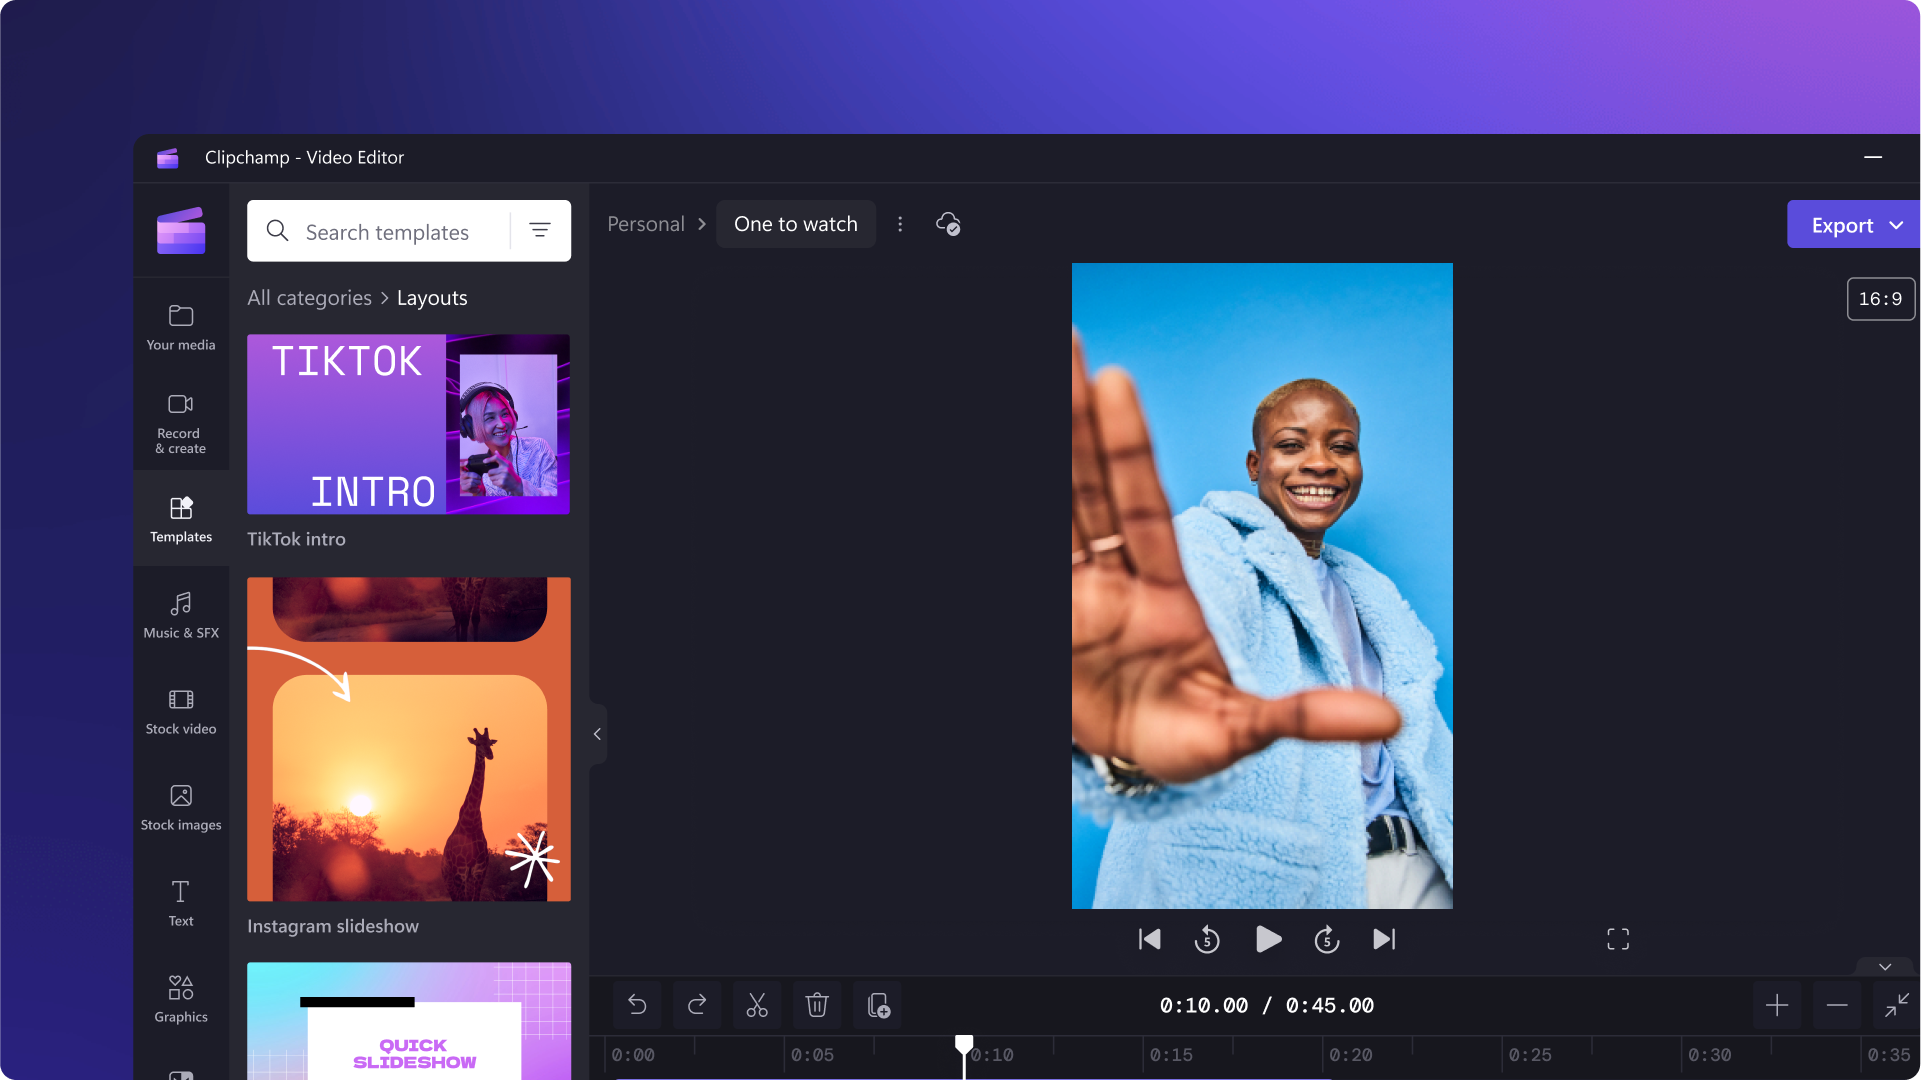 15 Free TikTok Video Downloaders To Use In 2023